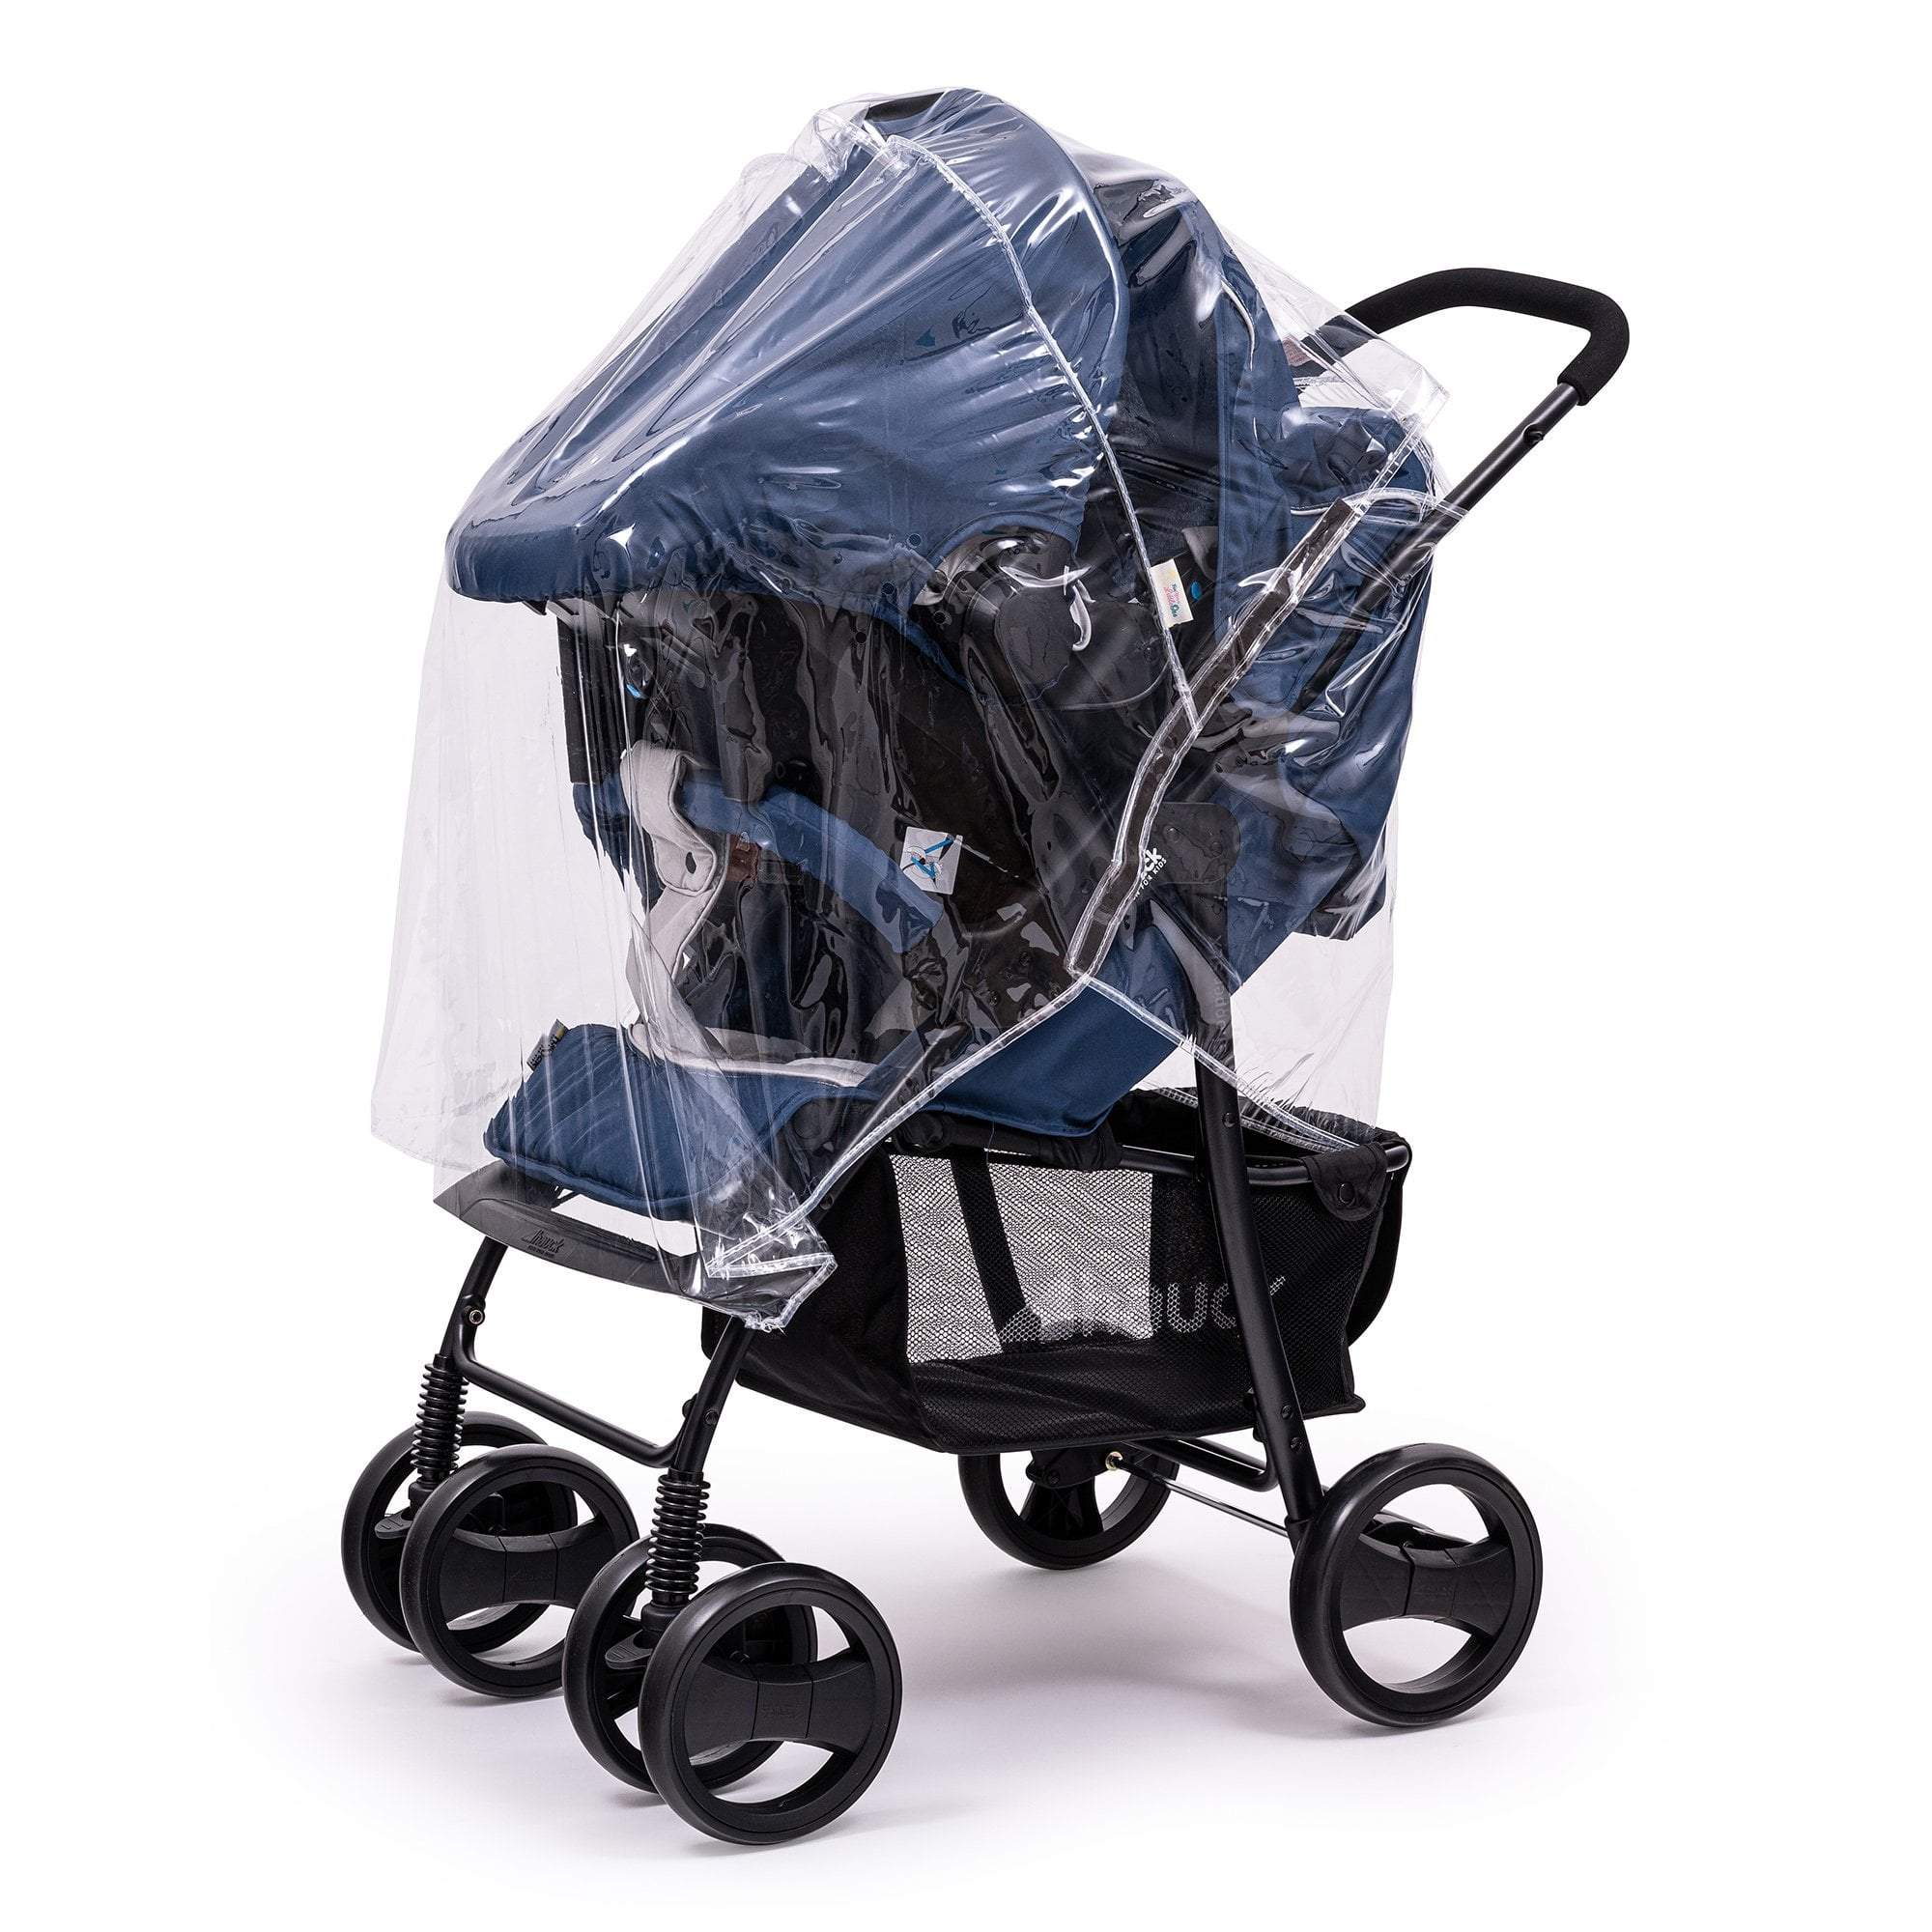 Travel System Raincover Compatible with Recaro - Fits All Models - For Your Little One